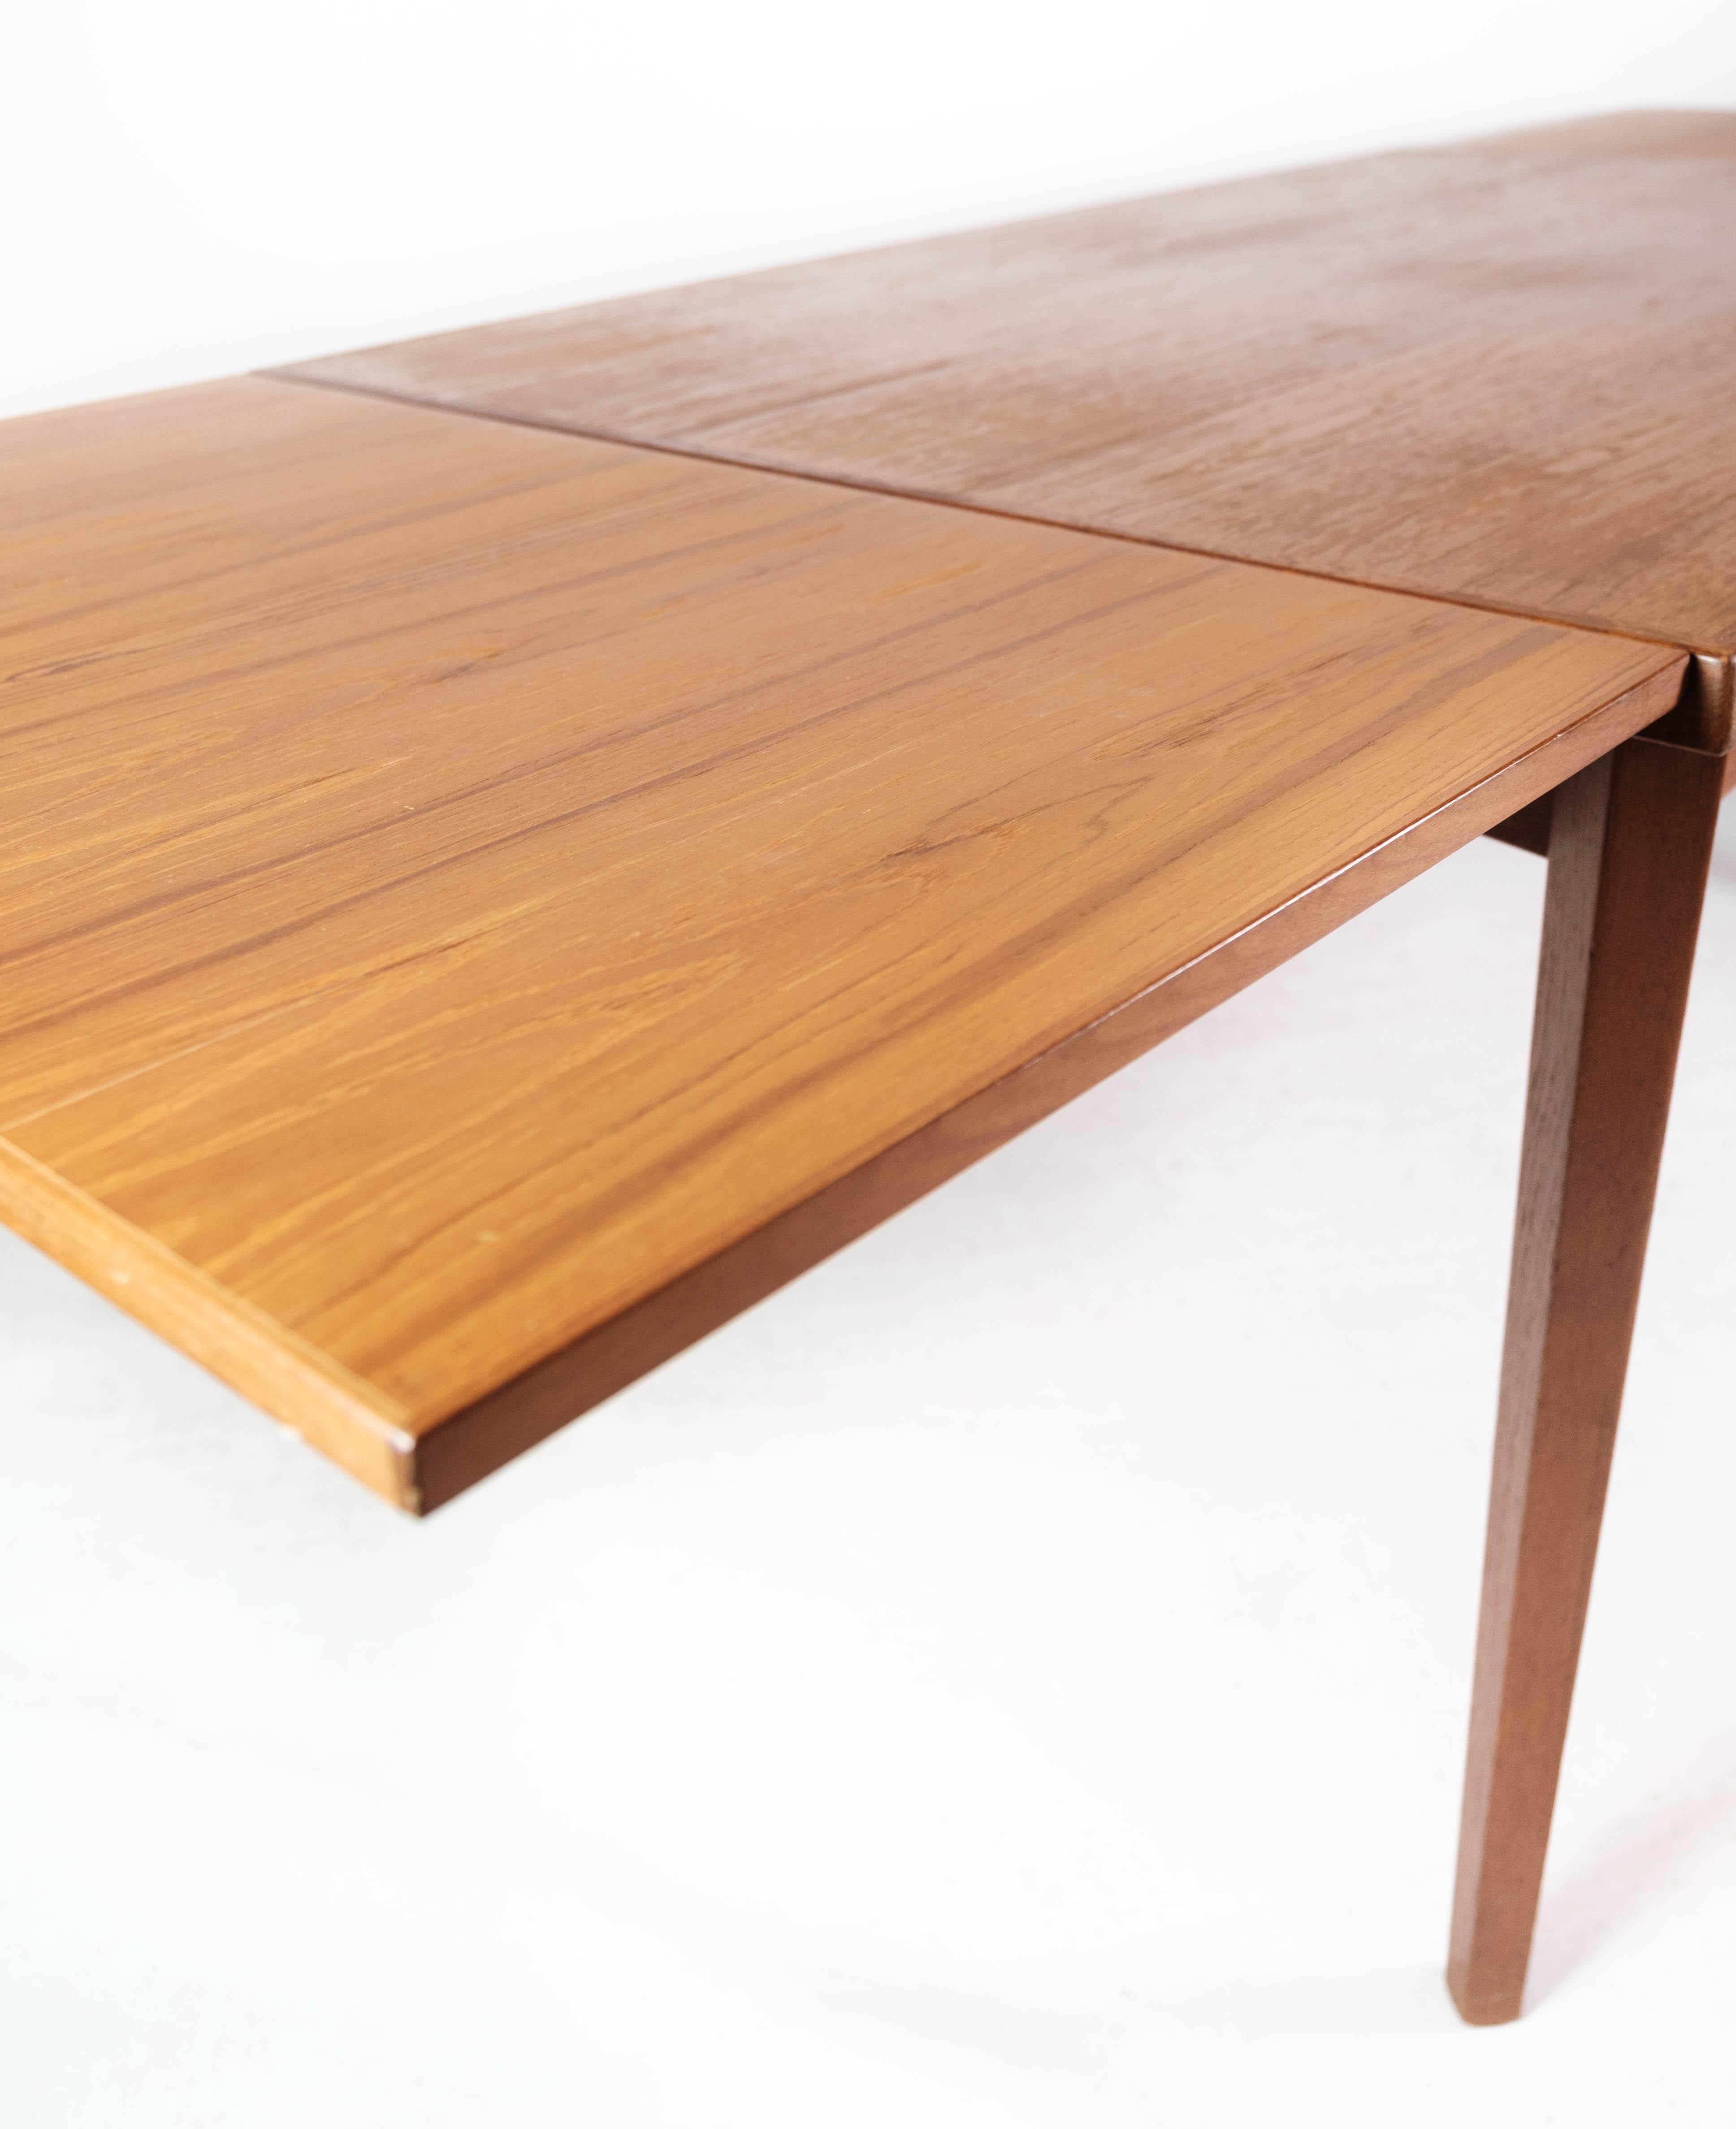 Dining Table in Teak with Extension Plates, of Danish Design from the 1960s For Sale 6